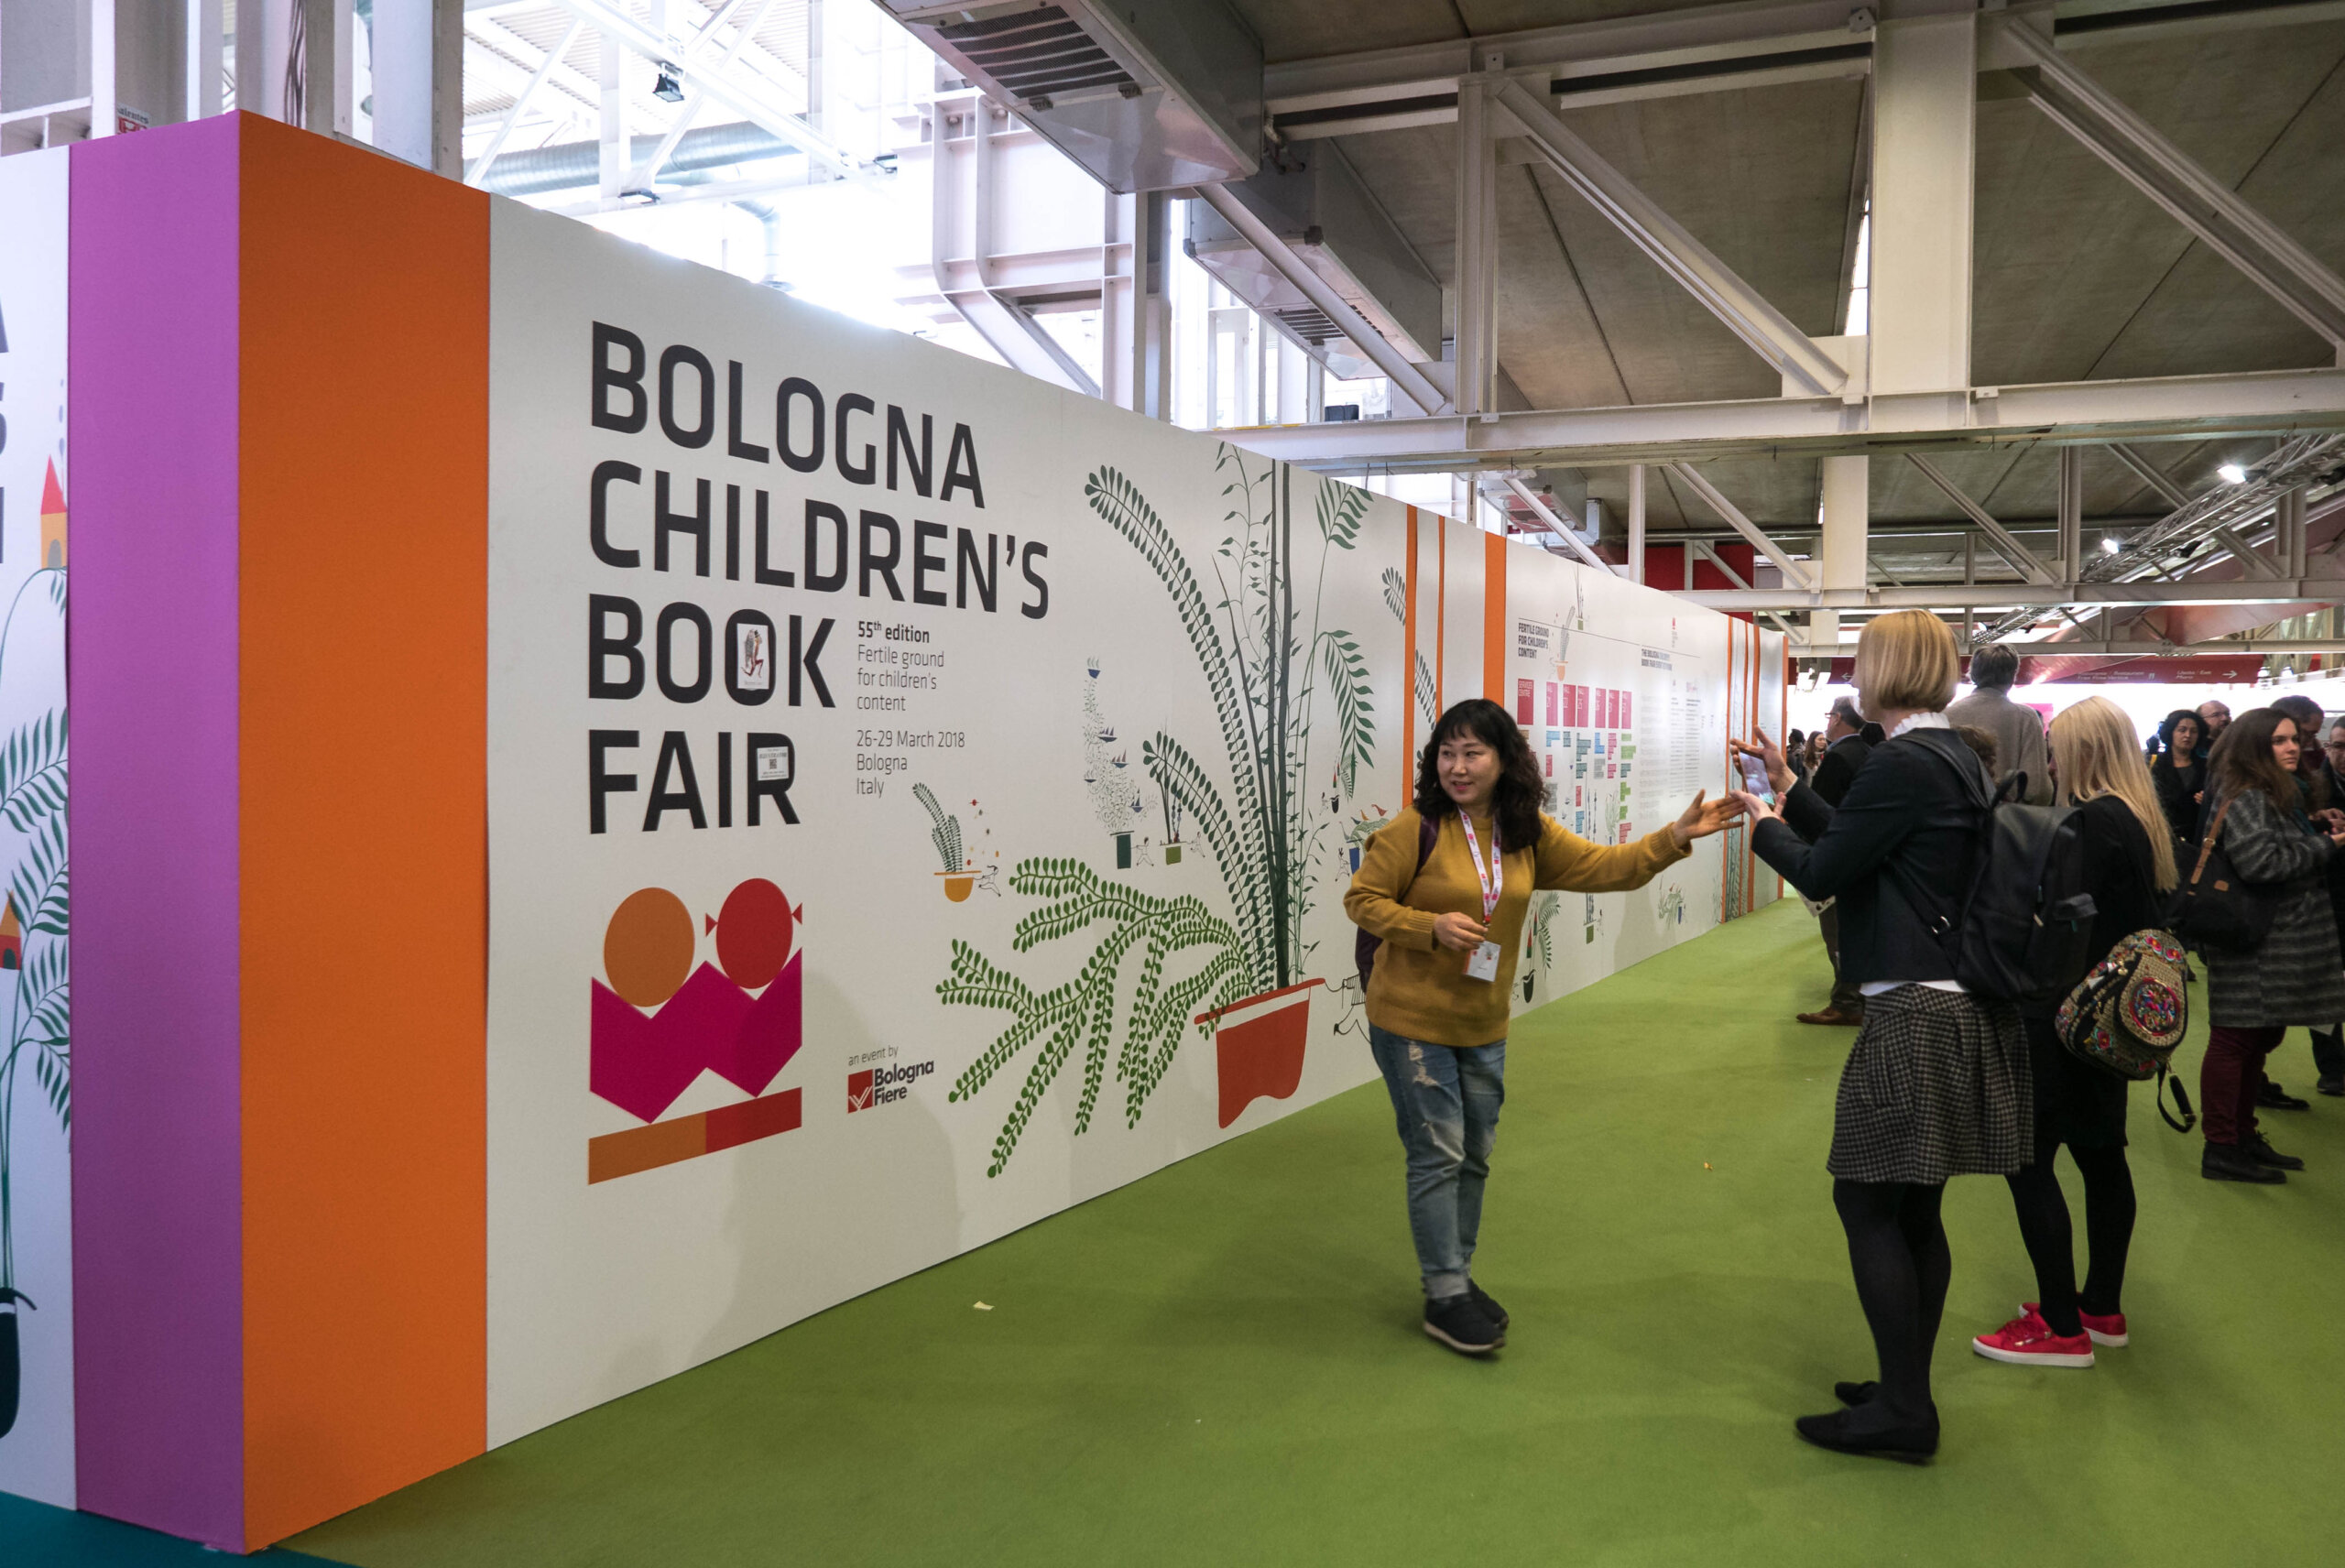 BOLOGNA, ITALY - MARCH 26, 2018: People visiting Bologna Children's Book Fair exhibition, one of the largest illustration sector trade show in Italy with 26,700 visitors in 2017.